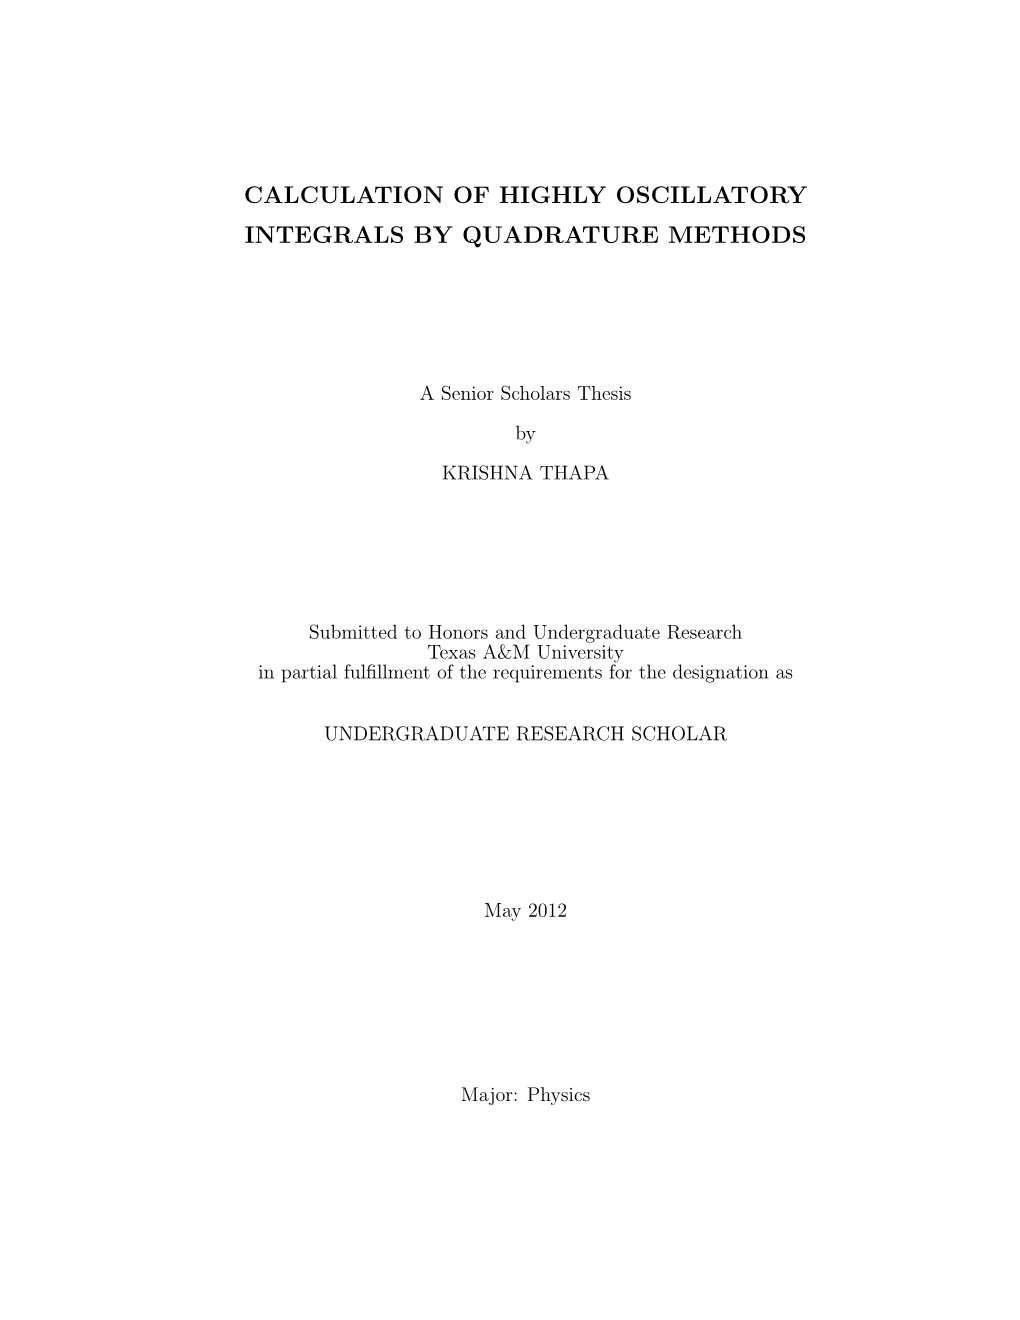 Calculation of Highly Oscillatory Integrals by Quadrature Methods